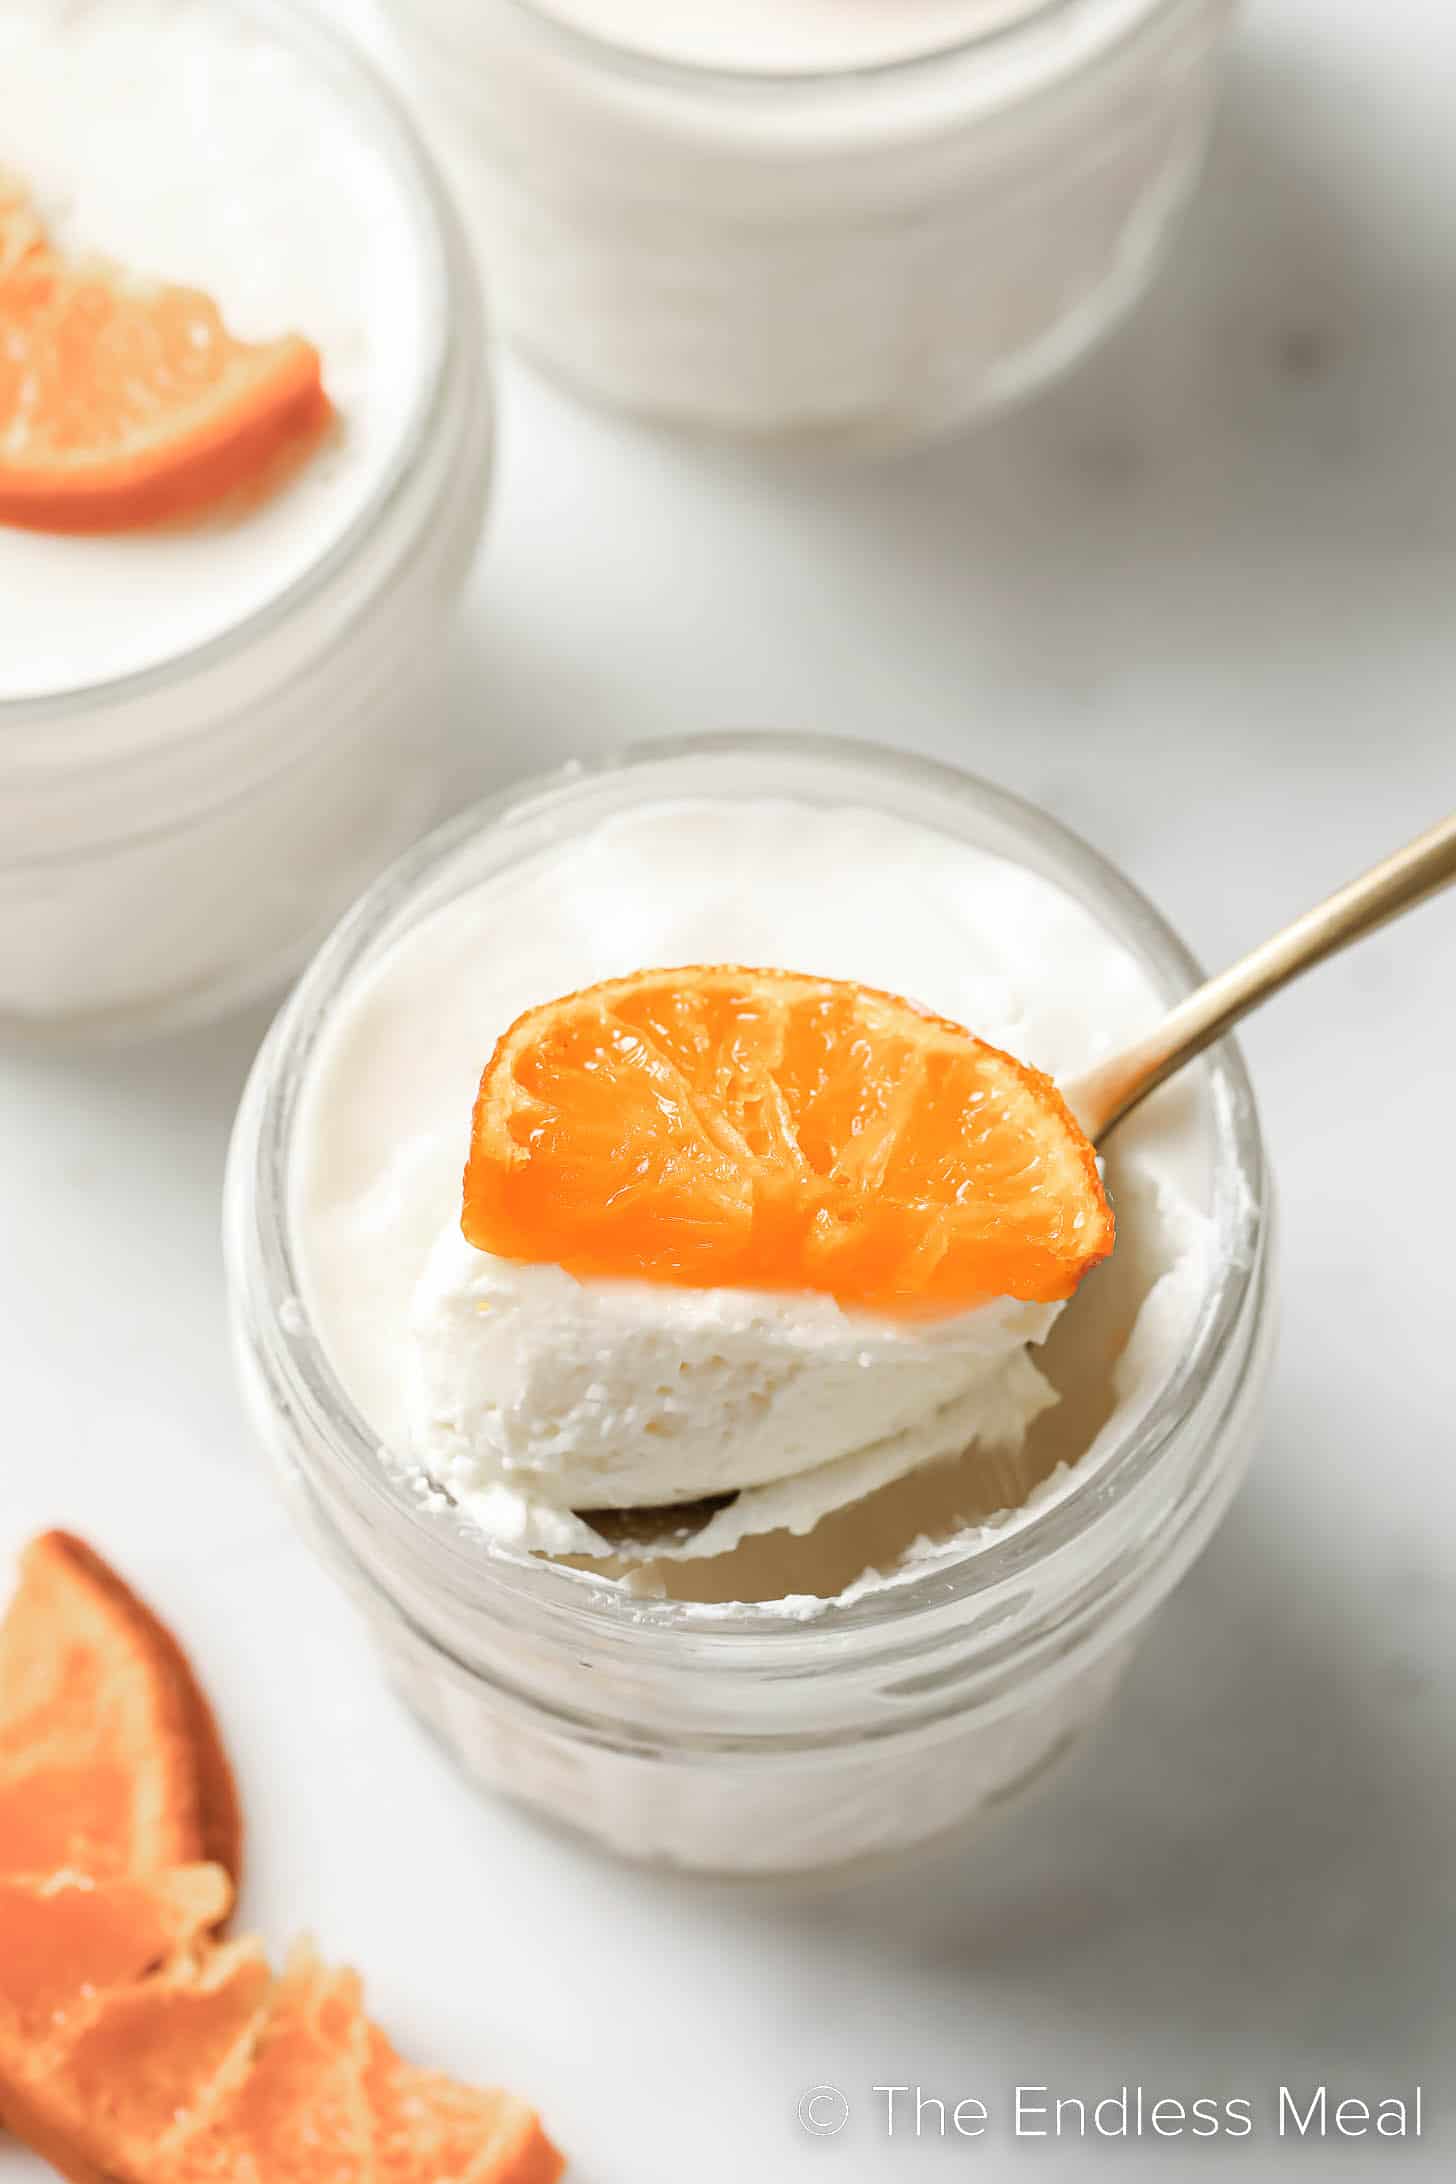 A spoon scooping some Orange Blossom Panna Cotta.